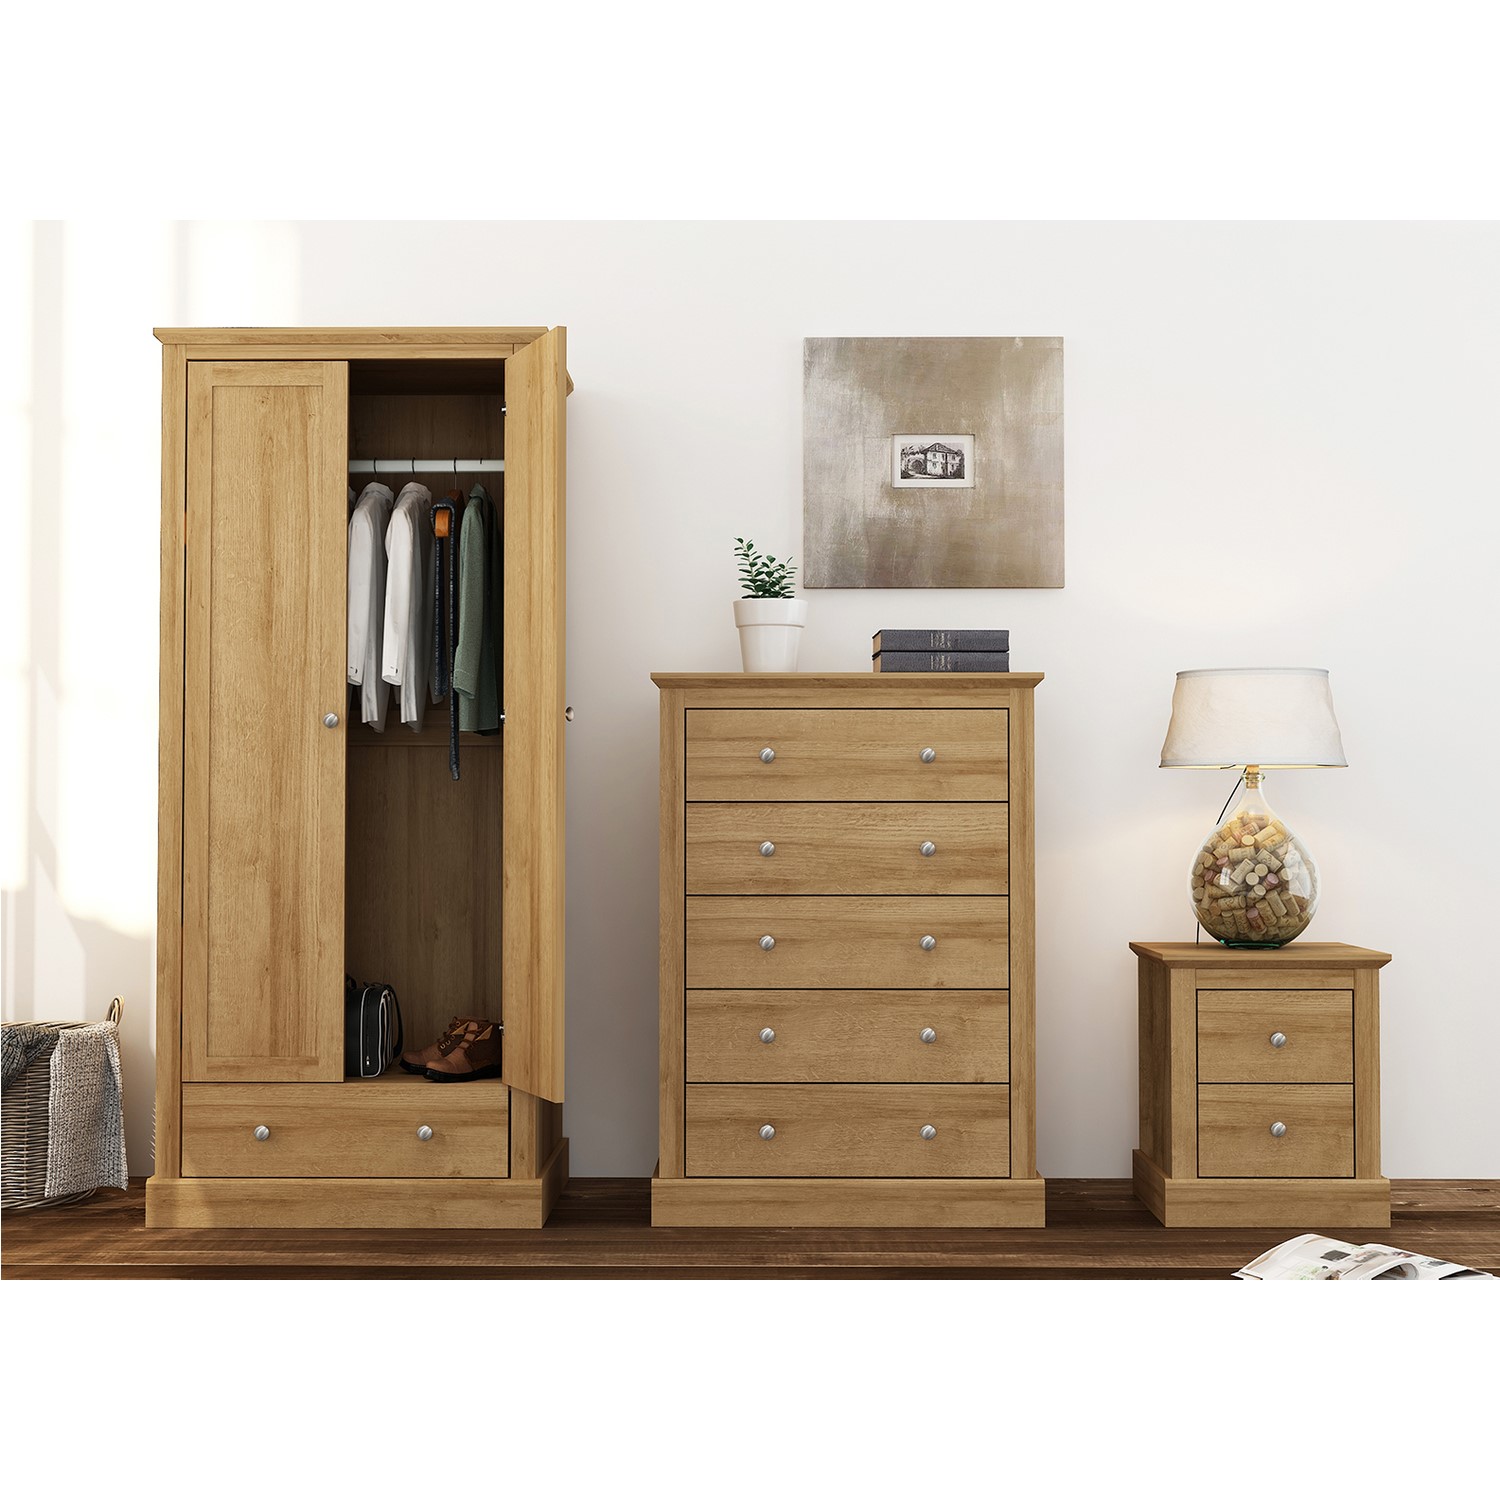 Read more about Oak chest of 5 drawers devon lpd